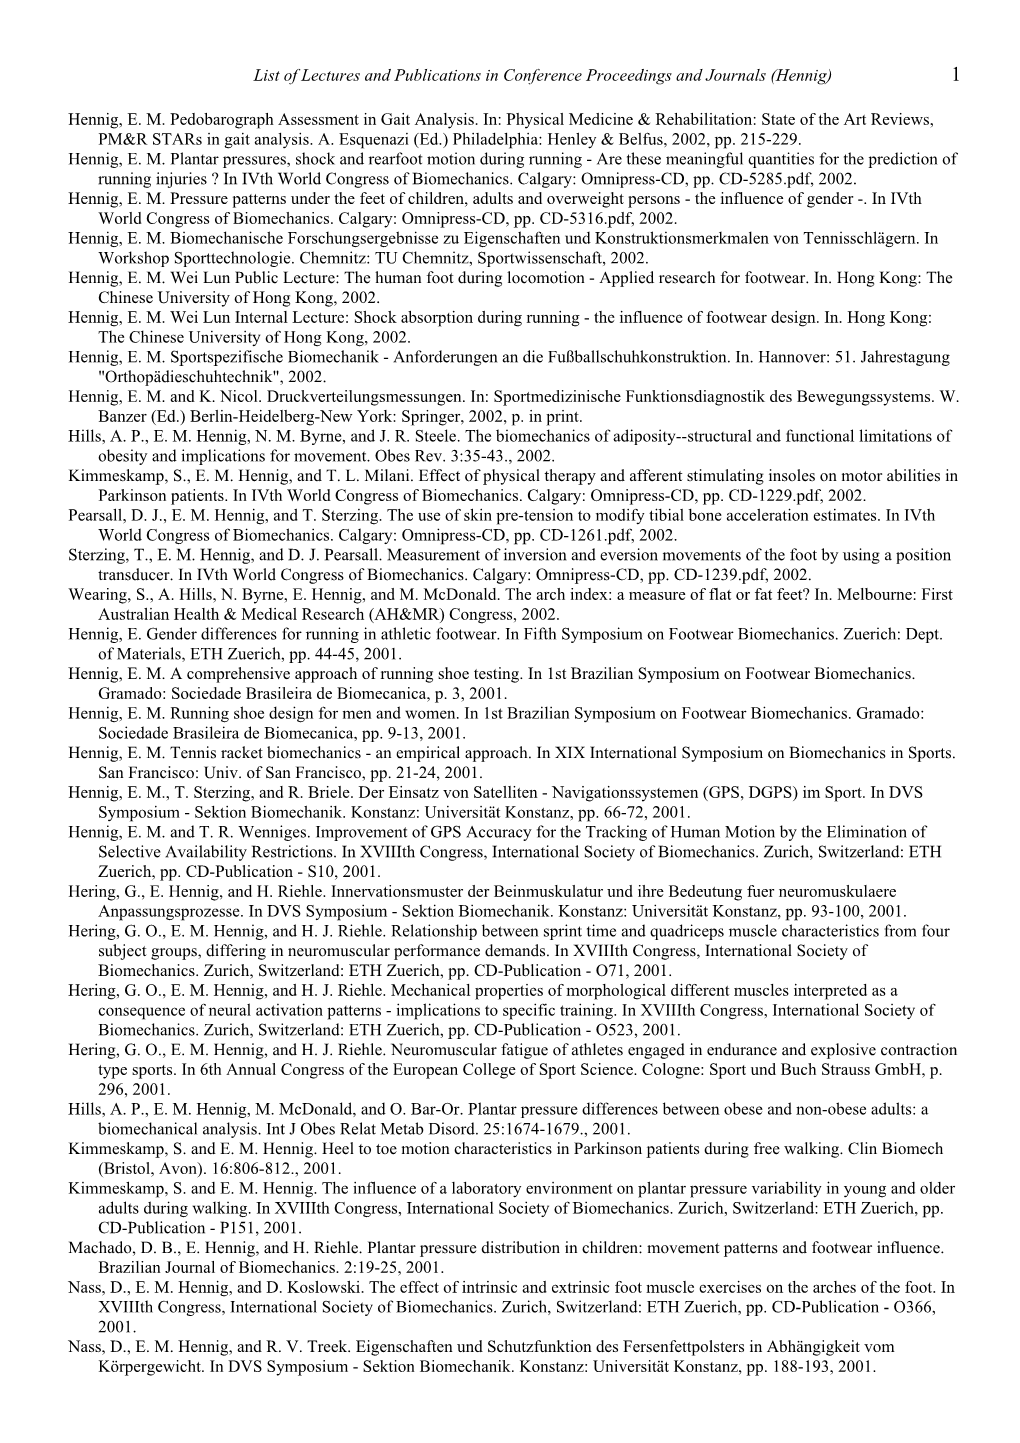 List of Lectures and Publications in Conference Proceedings and Journals (Hennig) 1